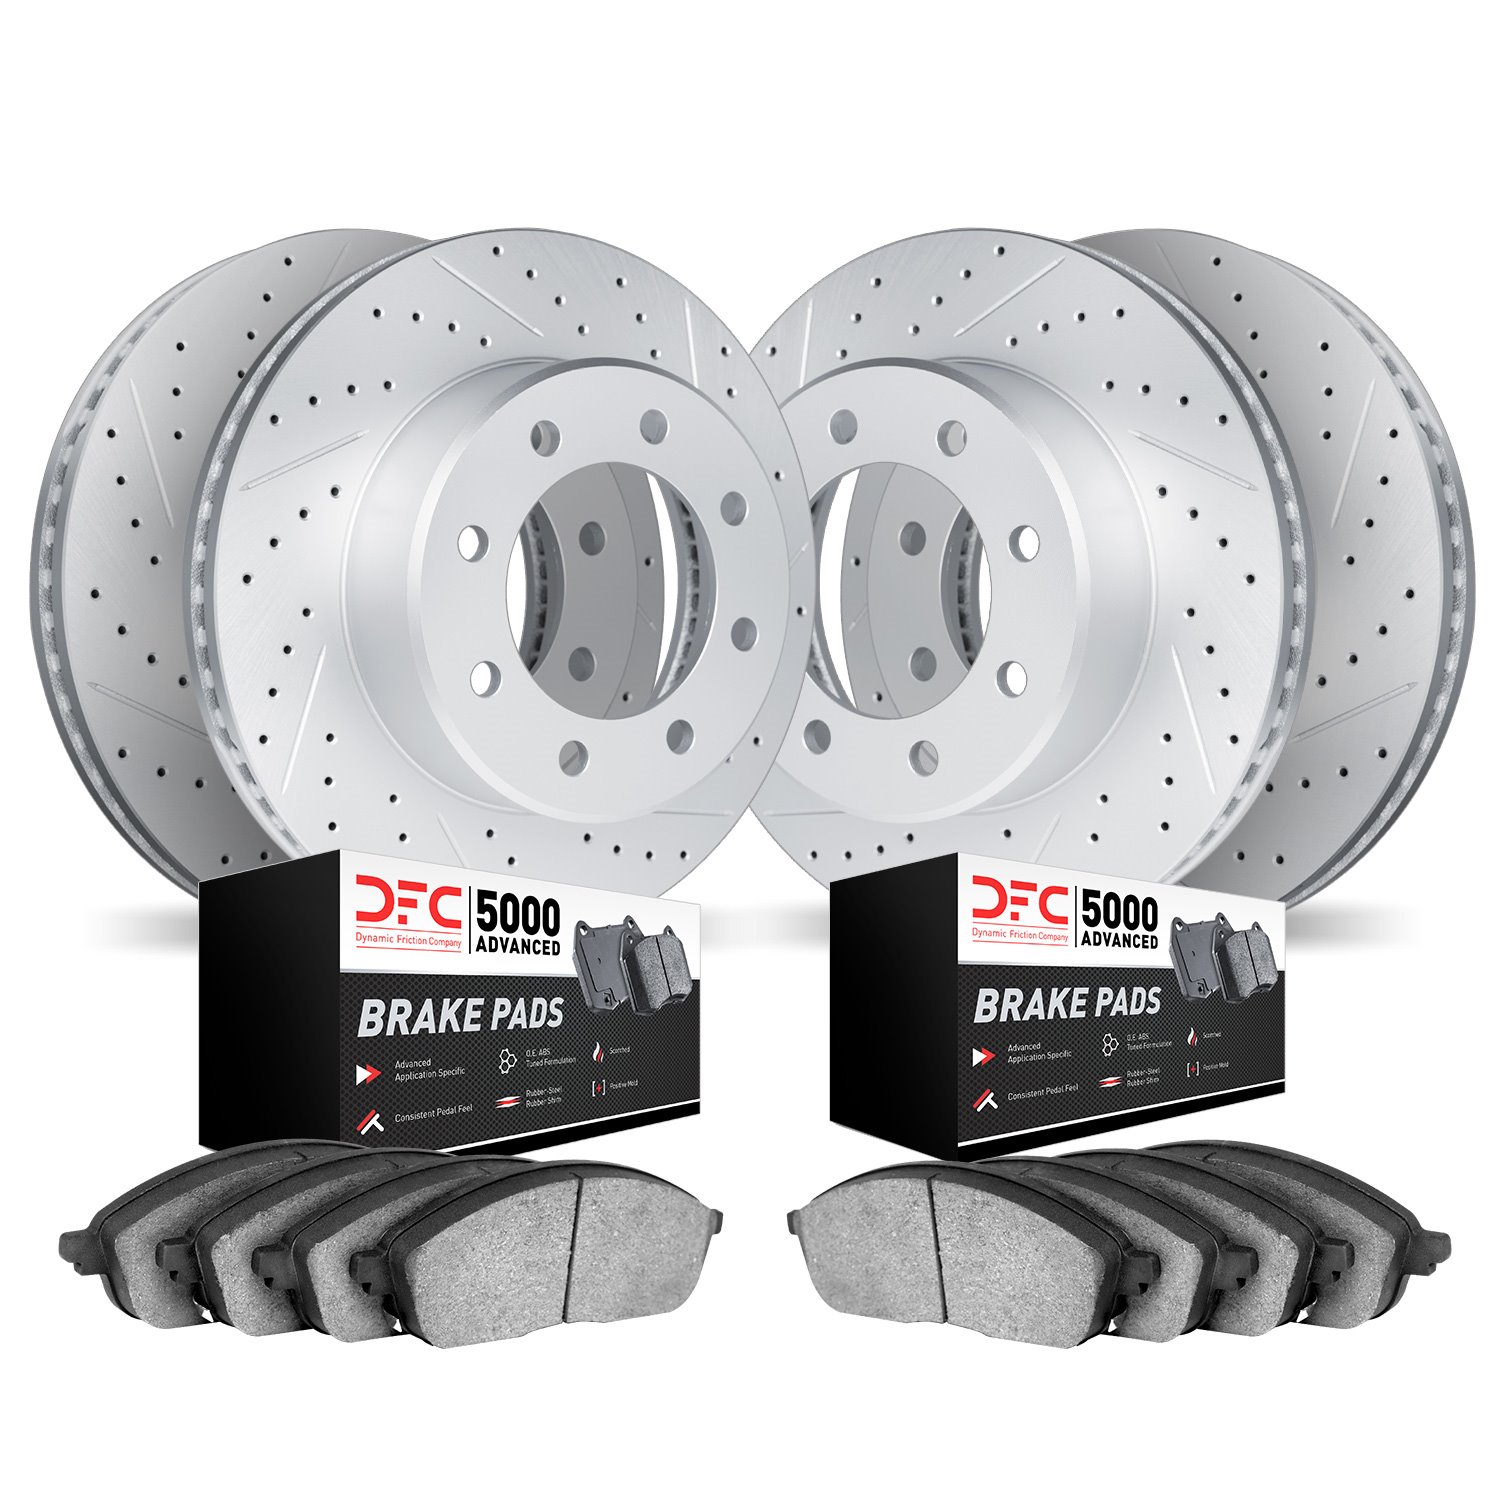 2504-40099 Geoperformance Drilled/Slotted Rotors w/5000 Advanced Brake Pads Kit, 2003-2008 Mopar, Position: Front and Rear